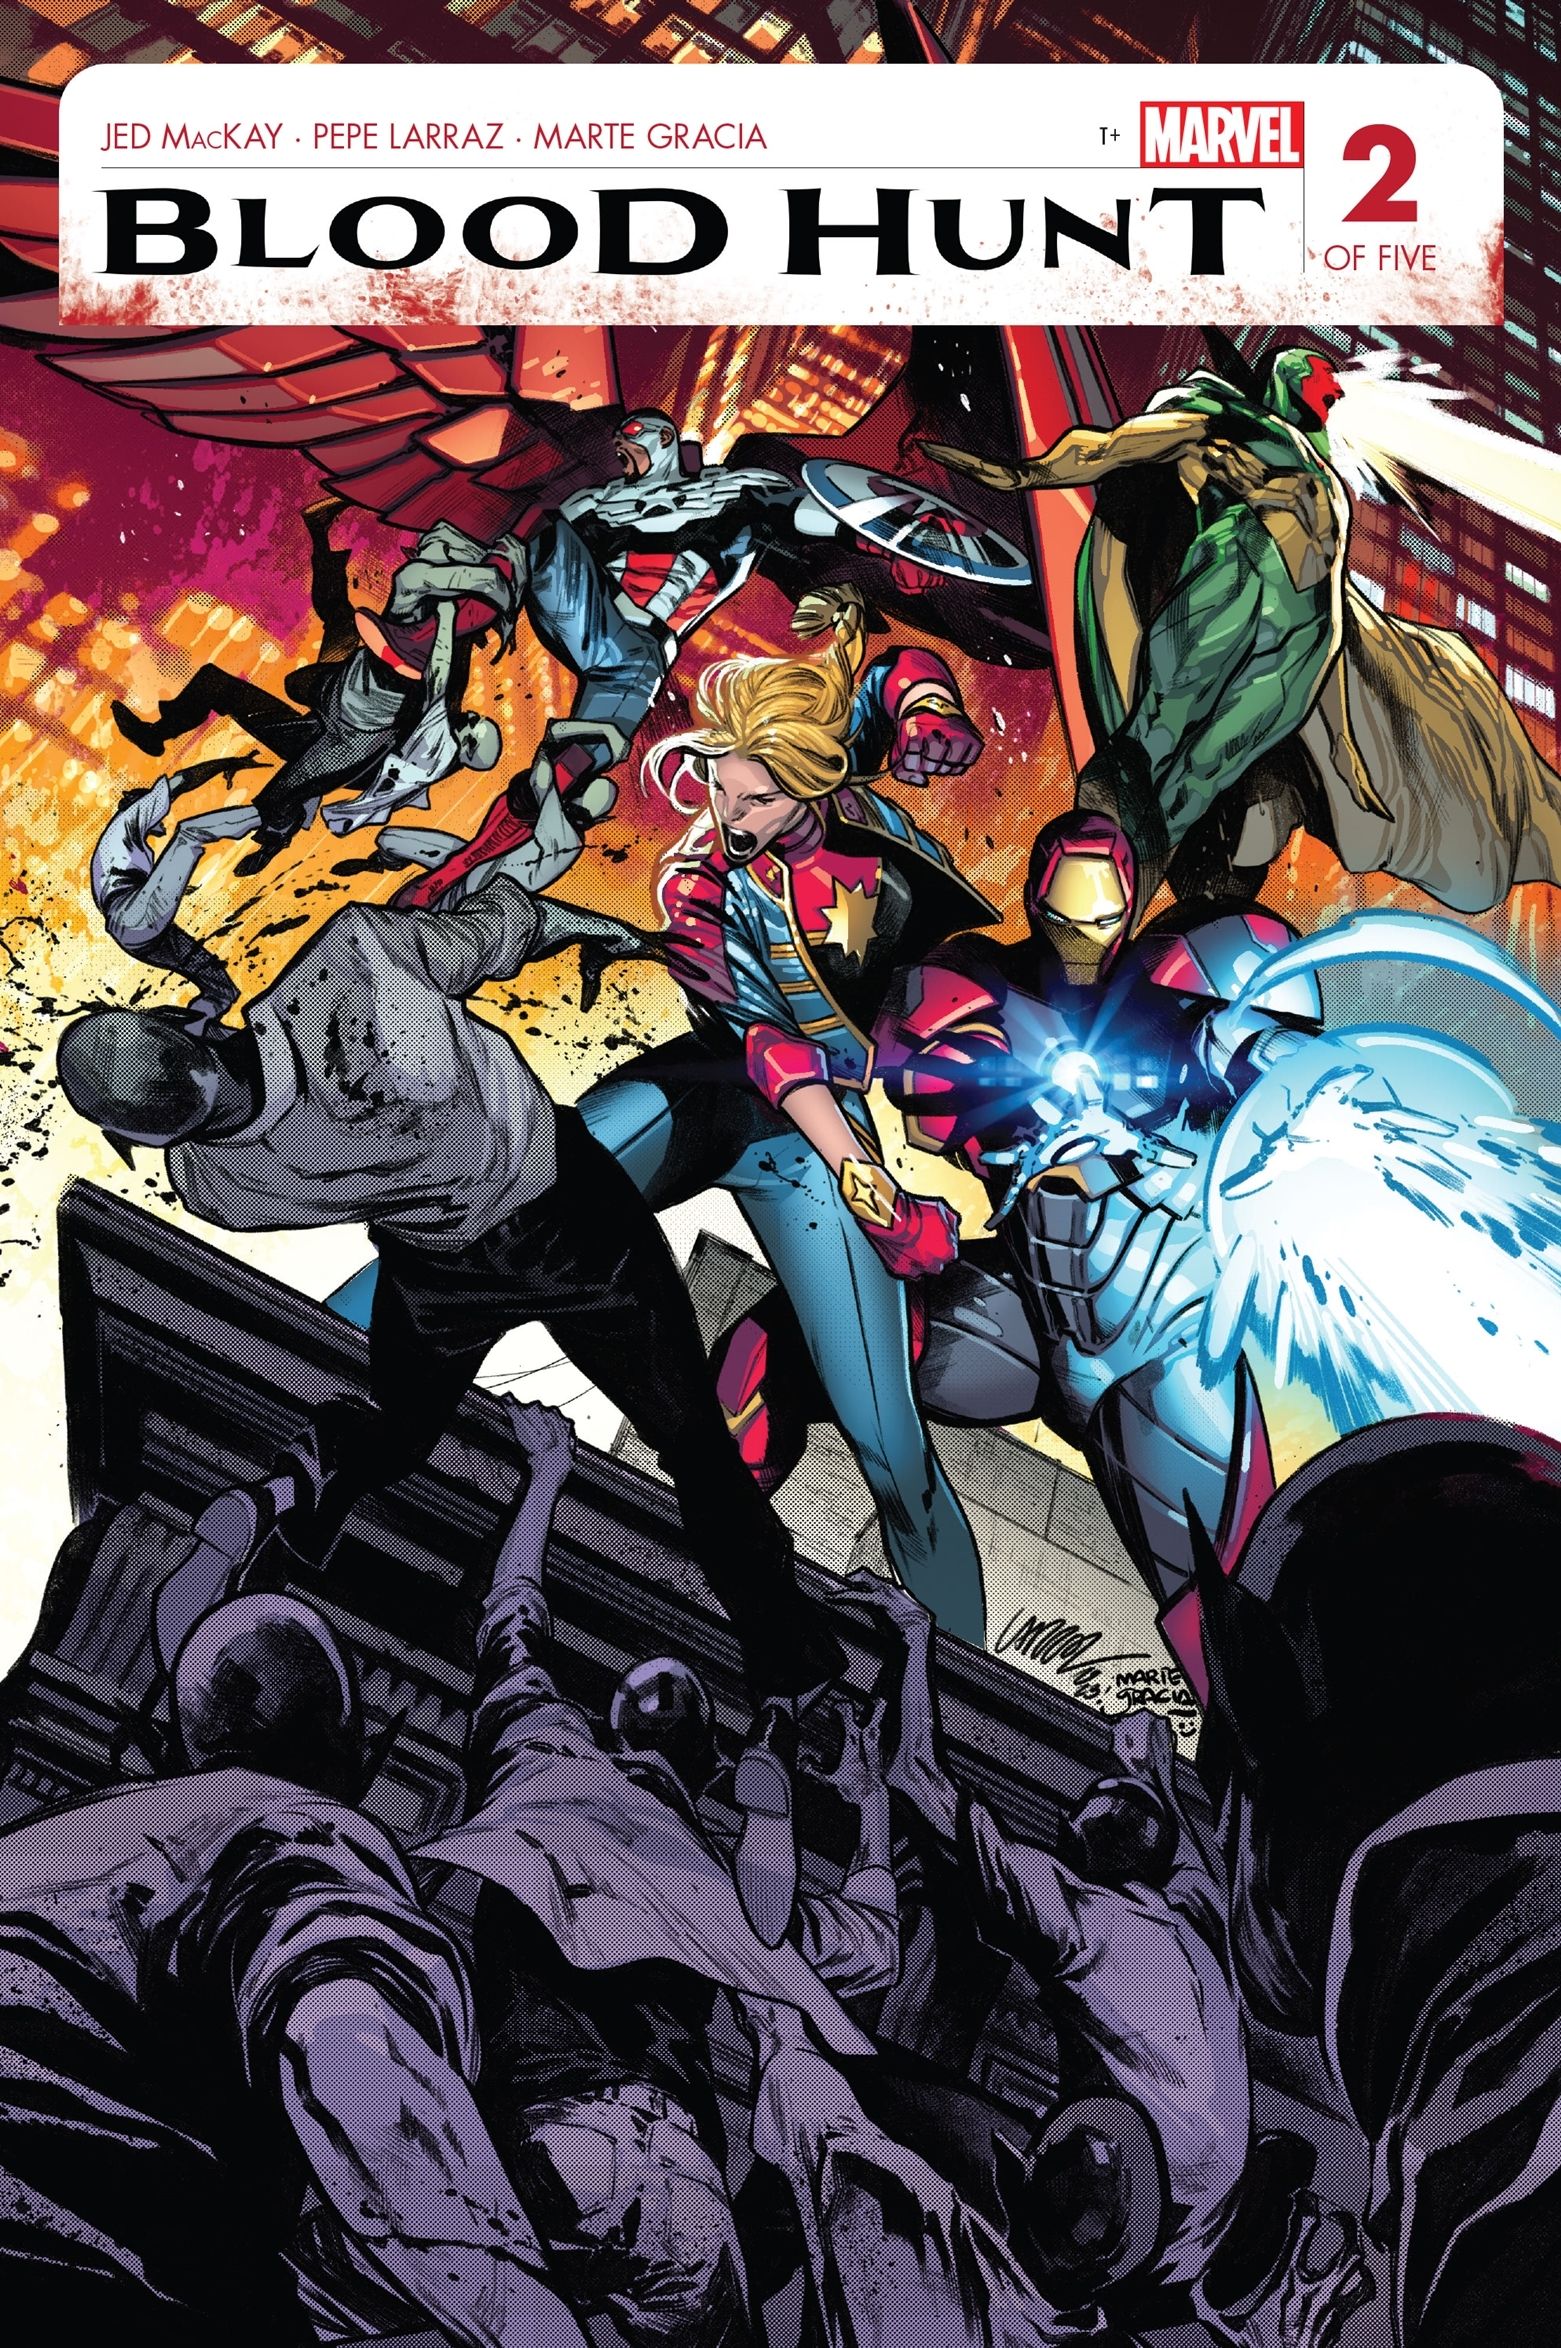 Iron Man, Captain America, Captain Marvel, and Vision attack vampires during Blood Hunt